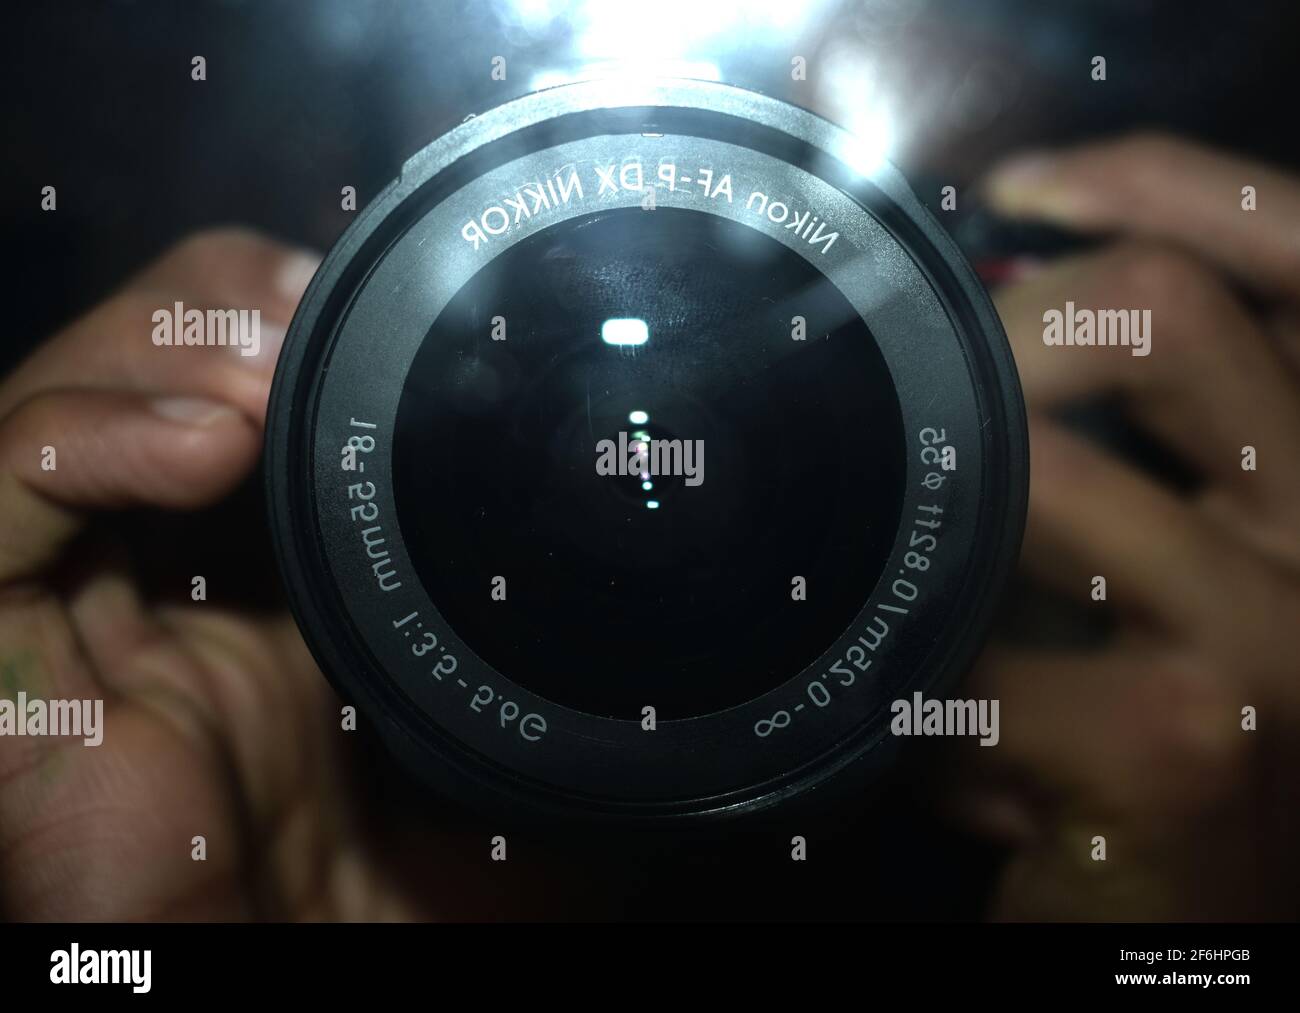 photo of a Nikon DSLR lens with the flash on creating glare. Stock Photo